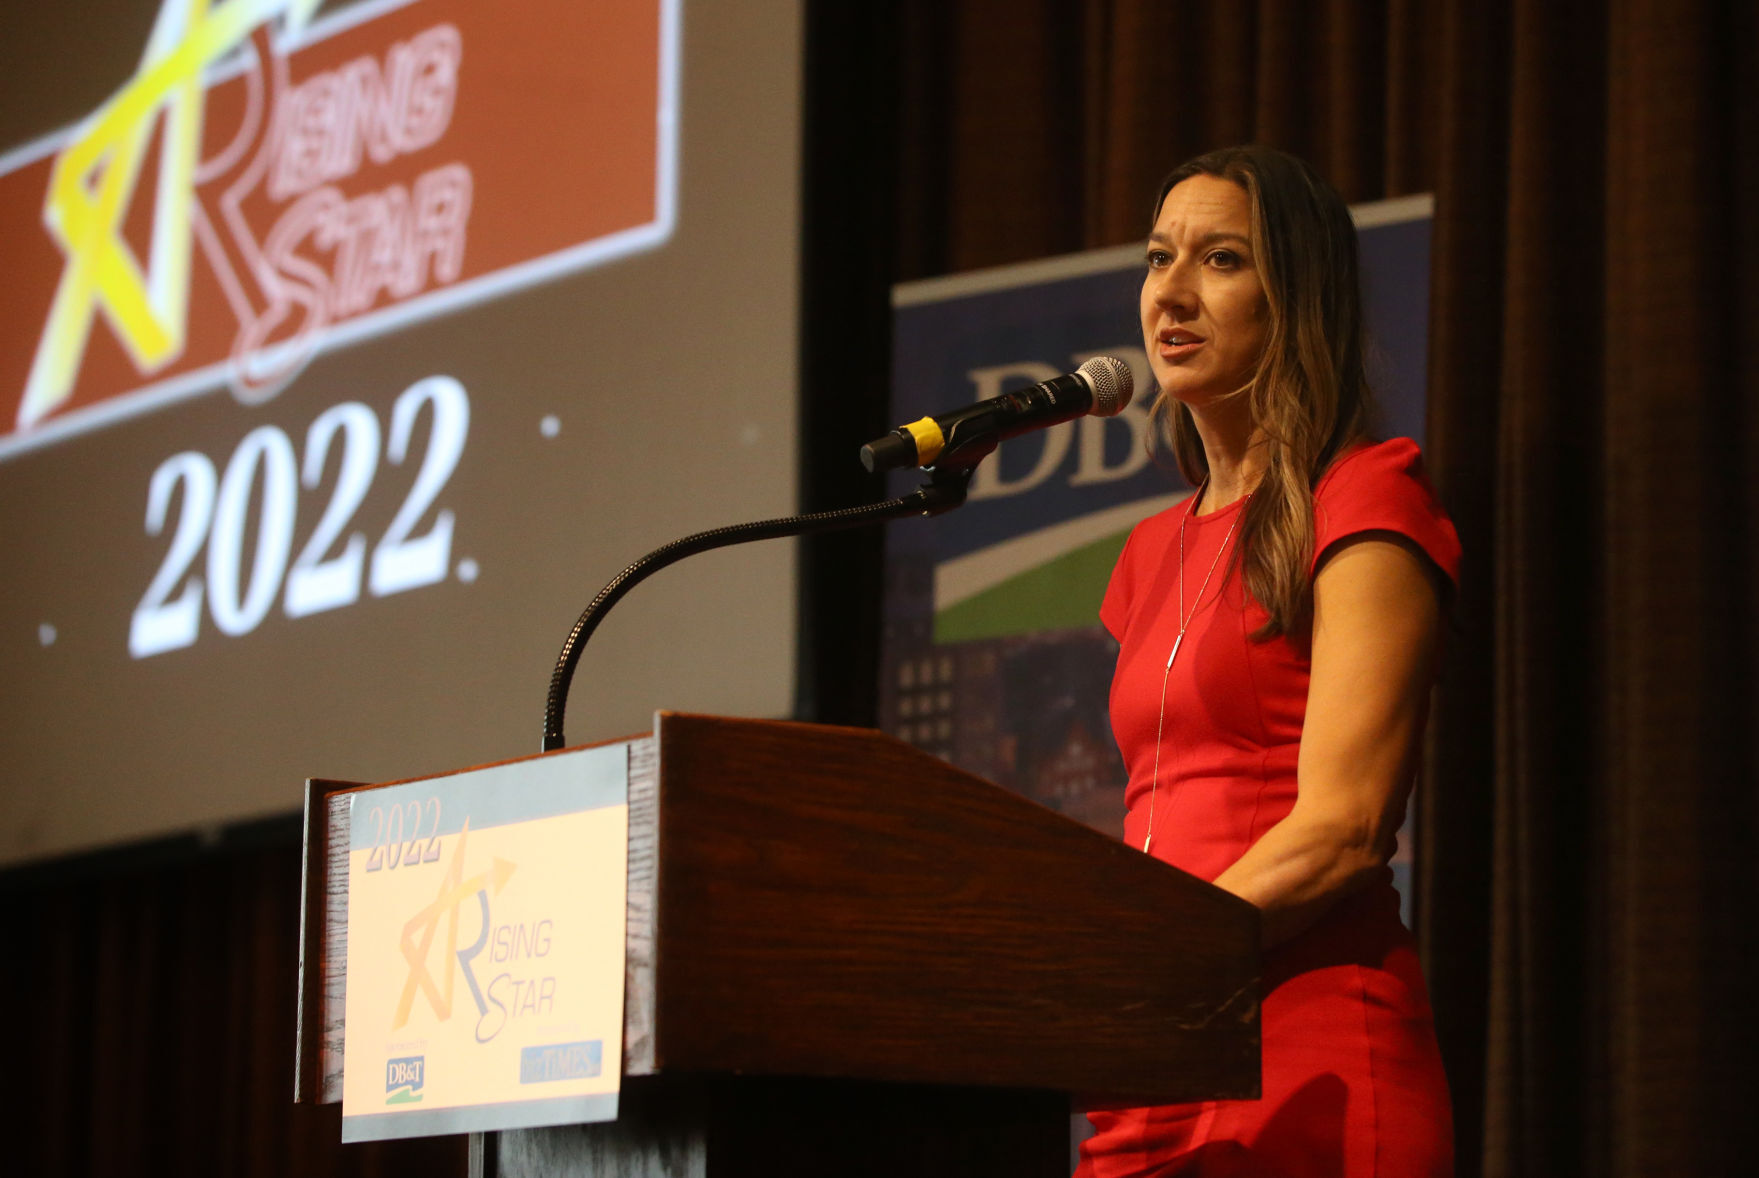 Stacey Hines, with Dubuque Bank & Trust, speaks during the Rising Stars breakfast at Diamond Jo Casino in Dubuque on Wednesday, Sept. 14, 2022. The event was presented by bizTimes.biz and sponsored by Dubuque Bank and Trust.    PHOTO CREDIT: JESSICA REILLY